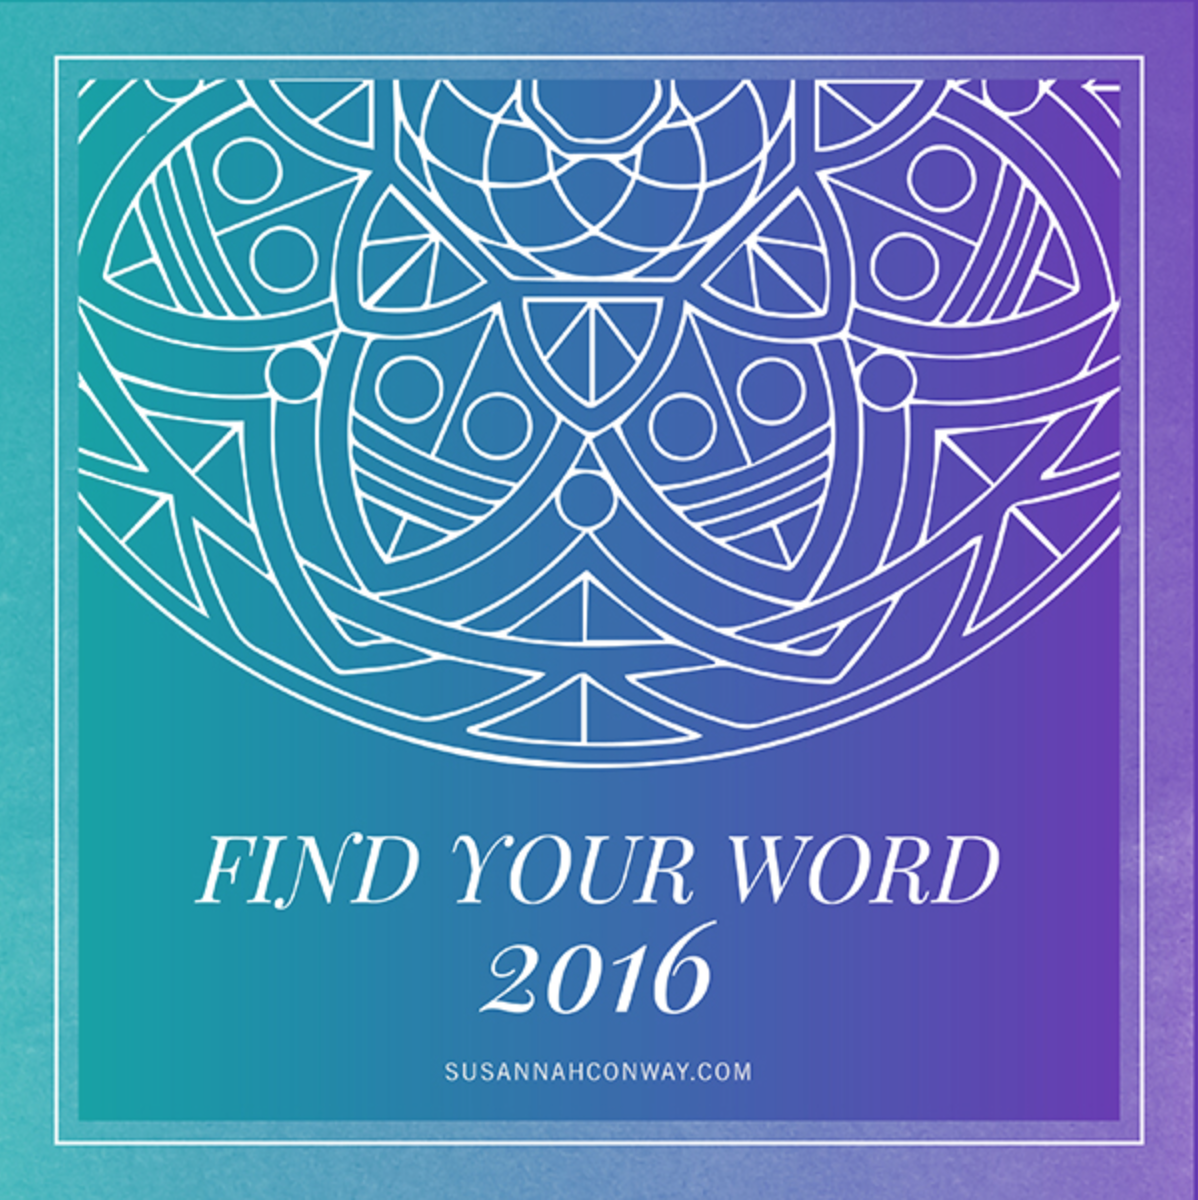 Find Your Word 2016 email course with Susannah Conway